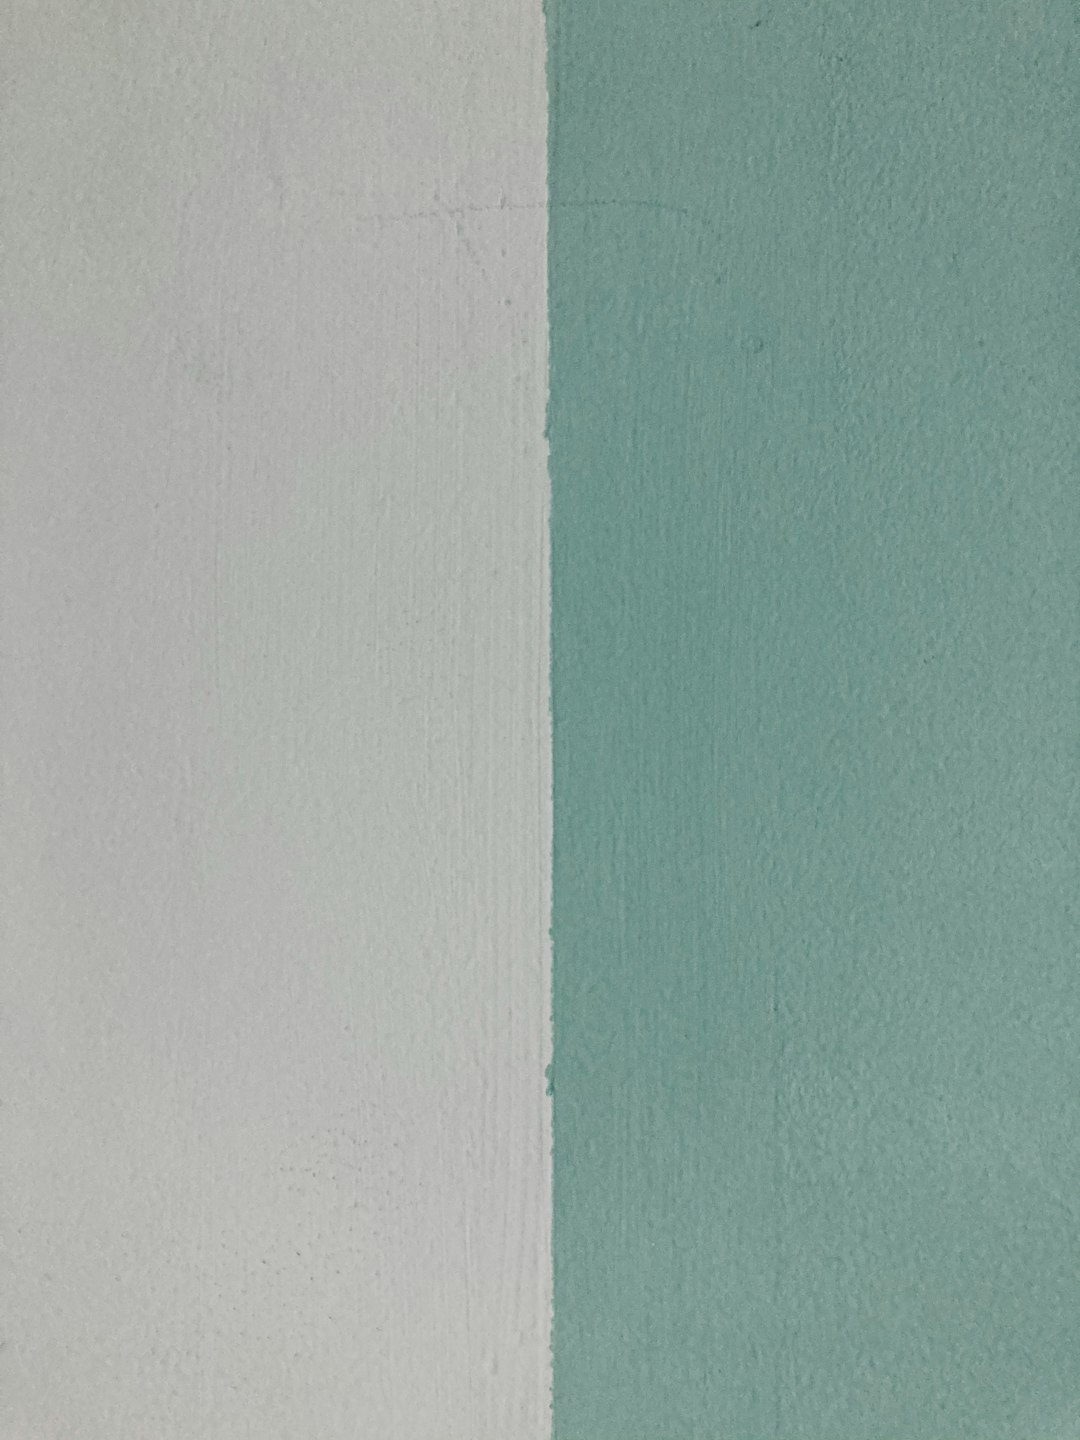 white wall paint beside green wall